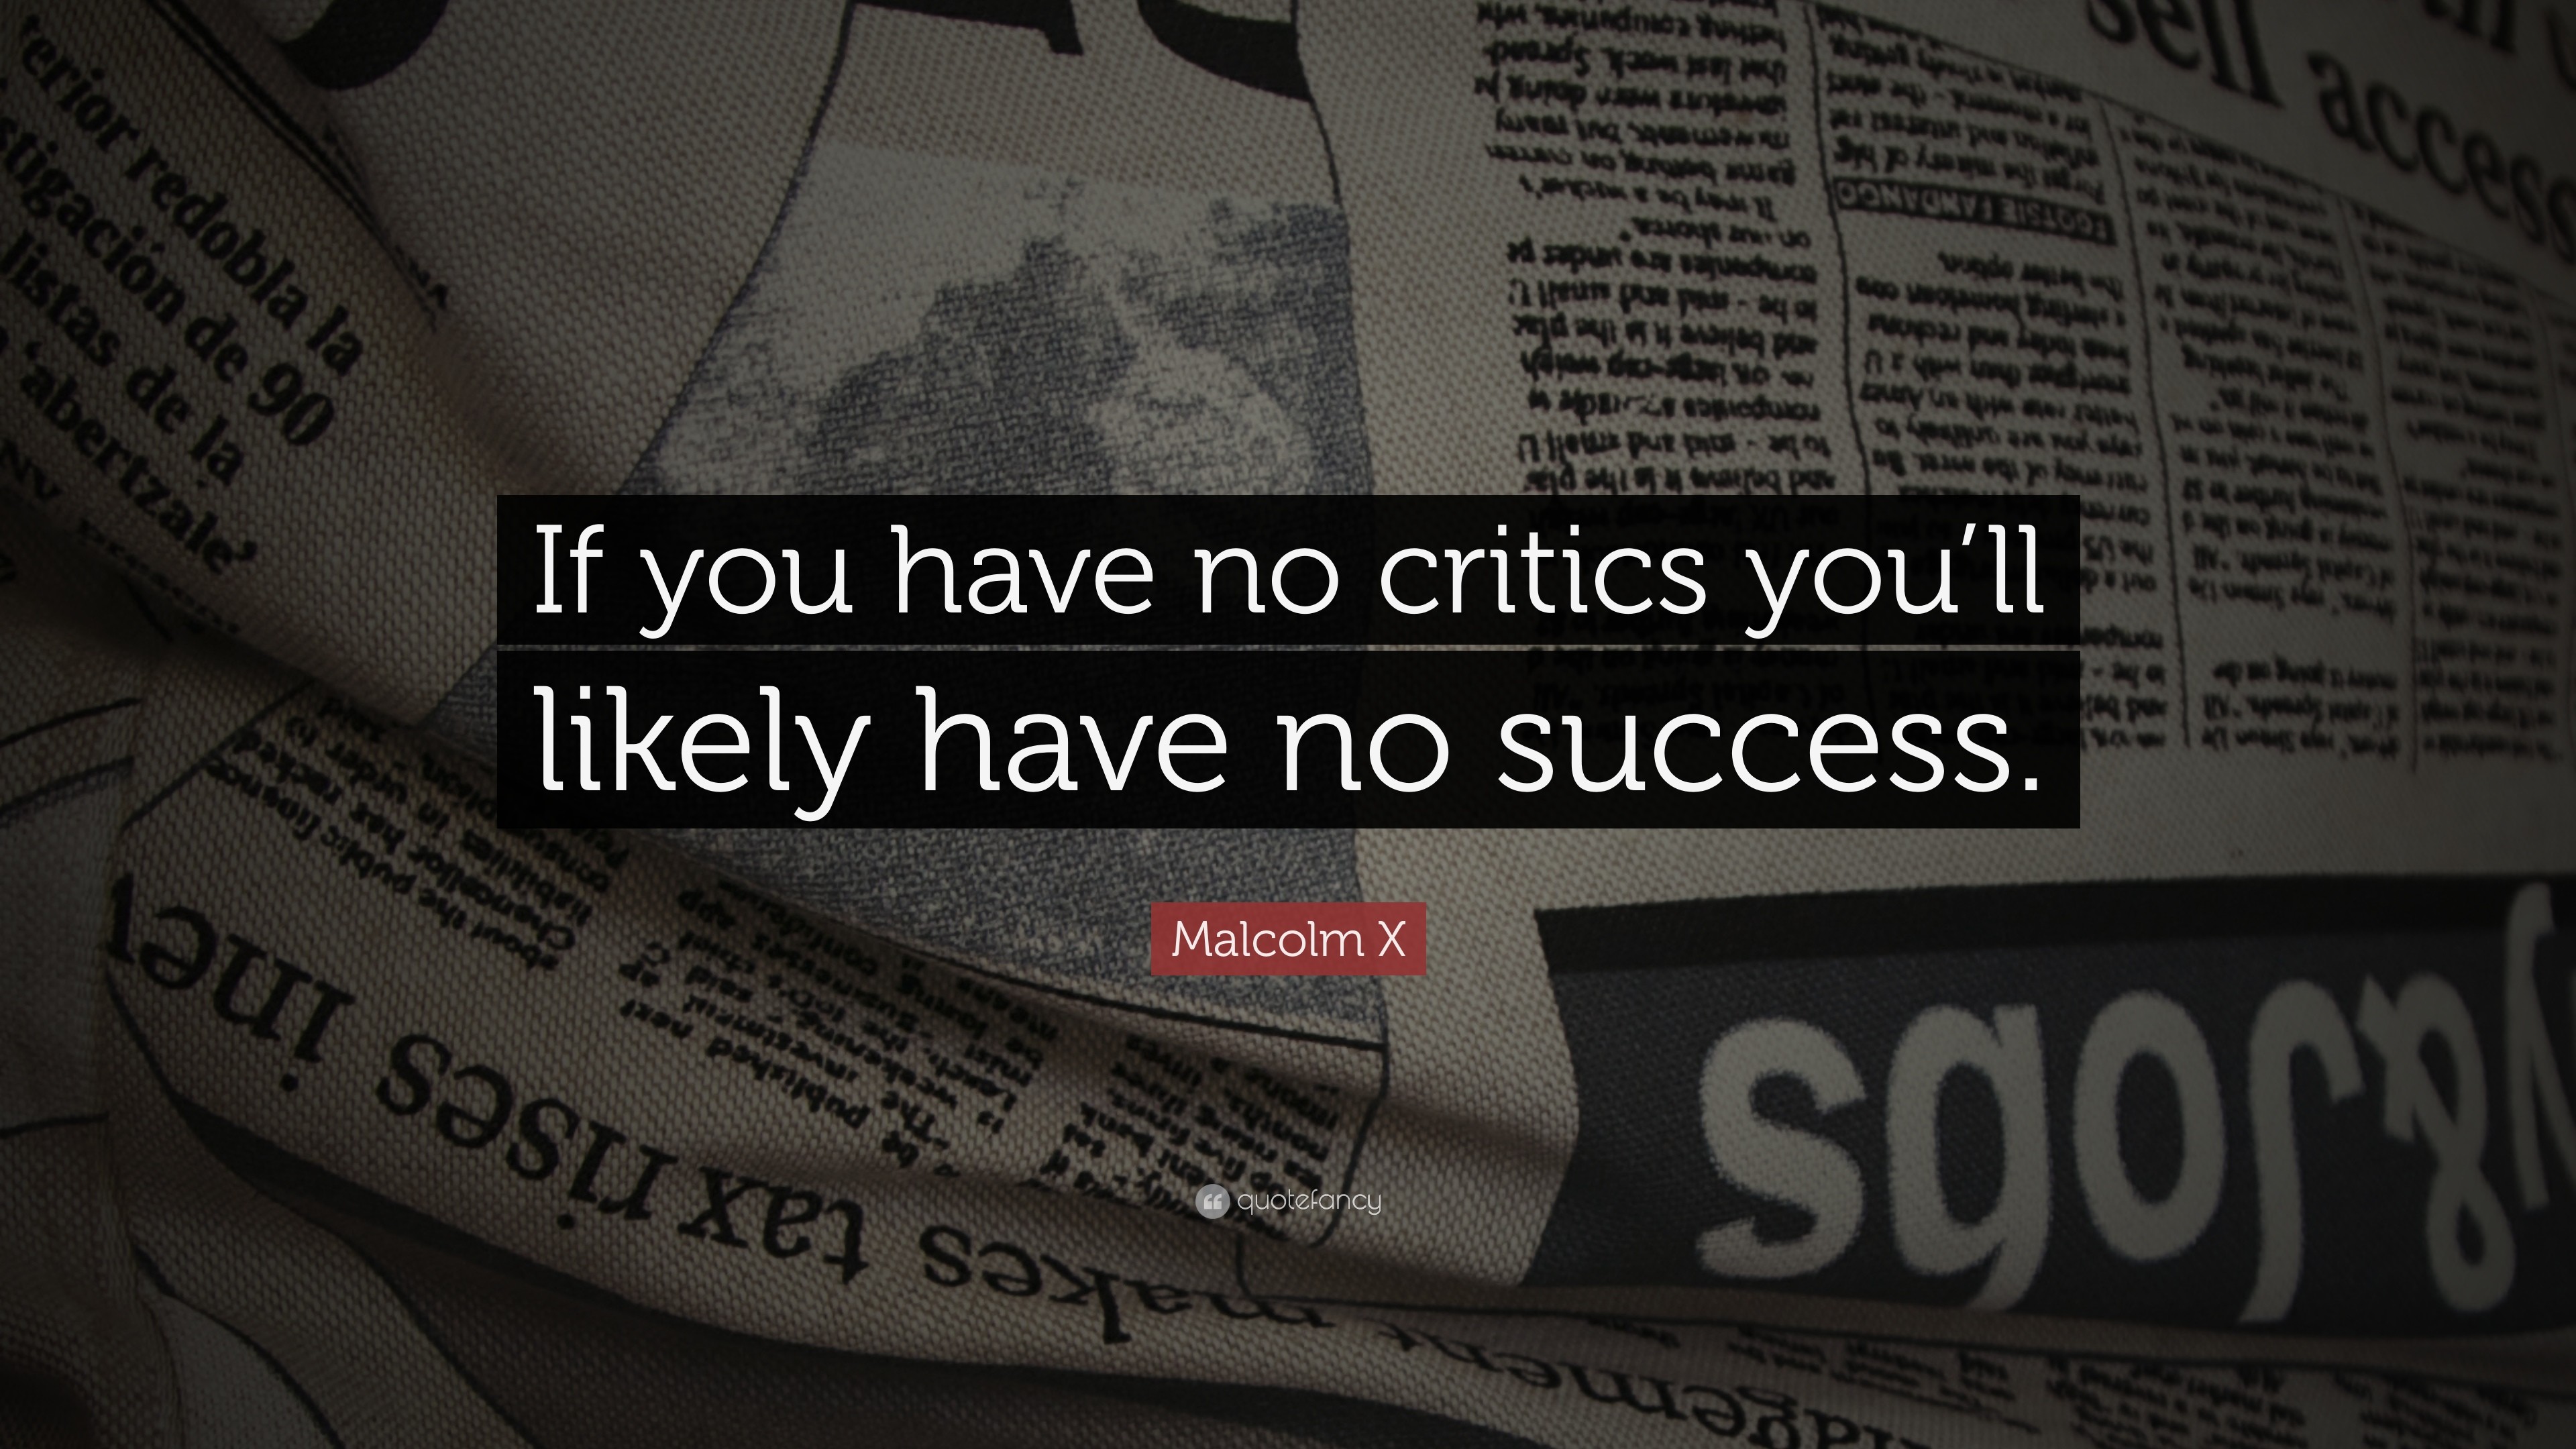 3840x2160 Malcolm X Quote: “If you have no critics you'll likely have no